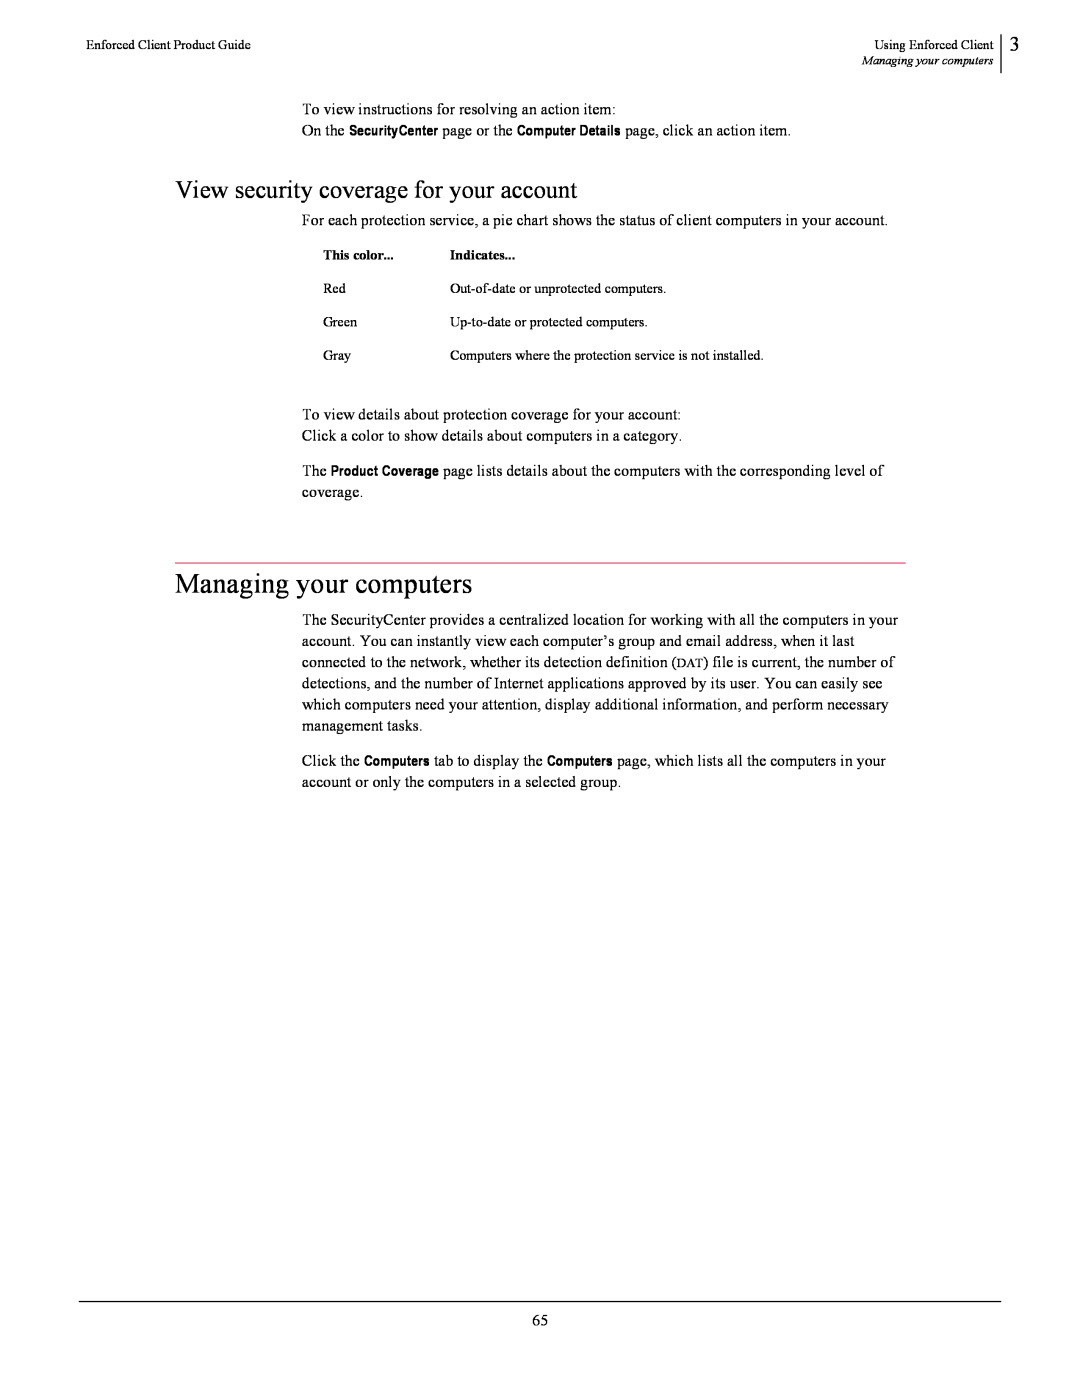 SonicWALL 4.5 manual Managing your computers, View security coverage for your account 